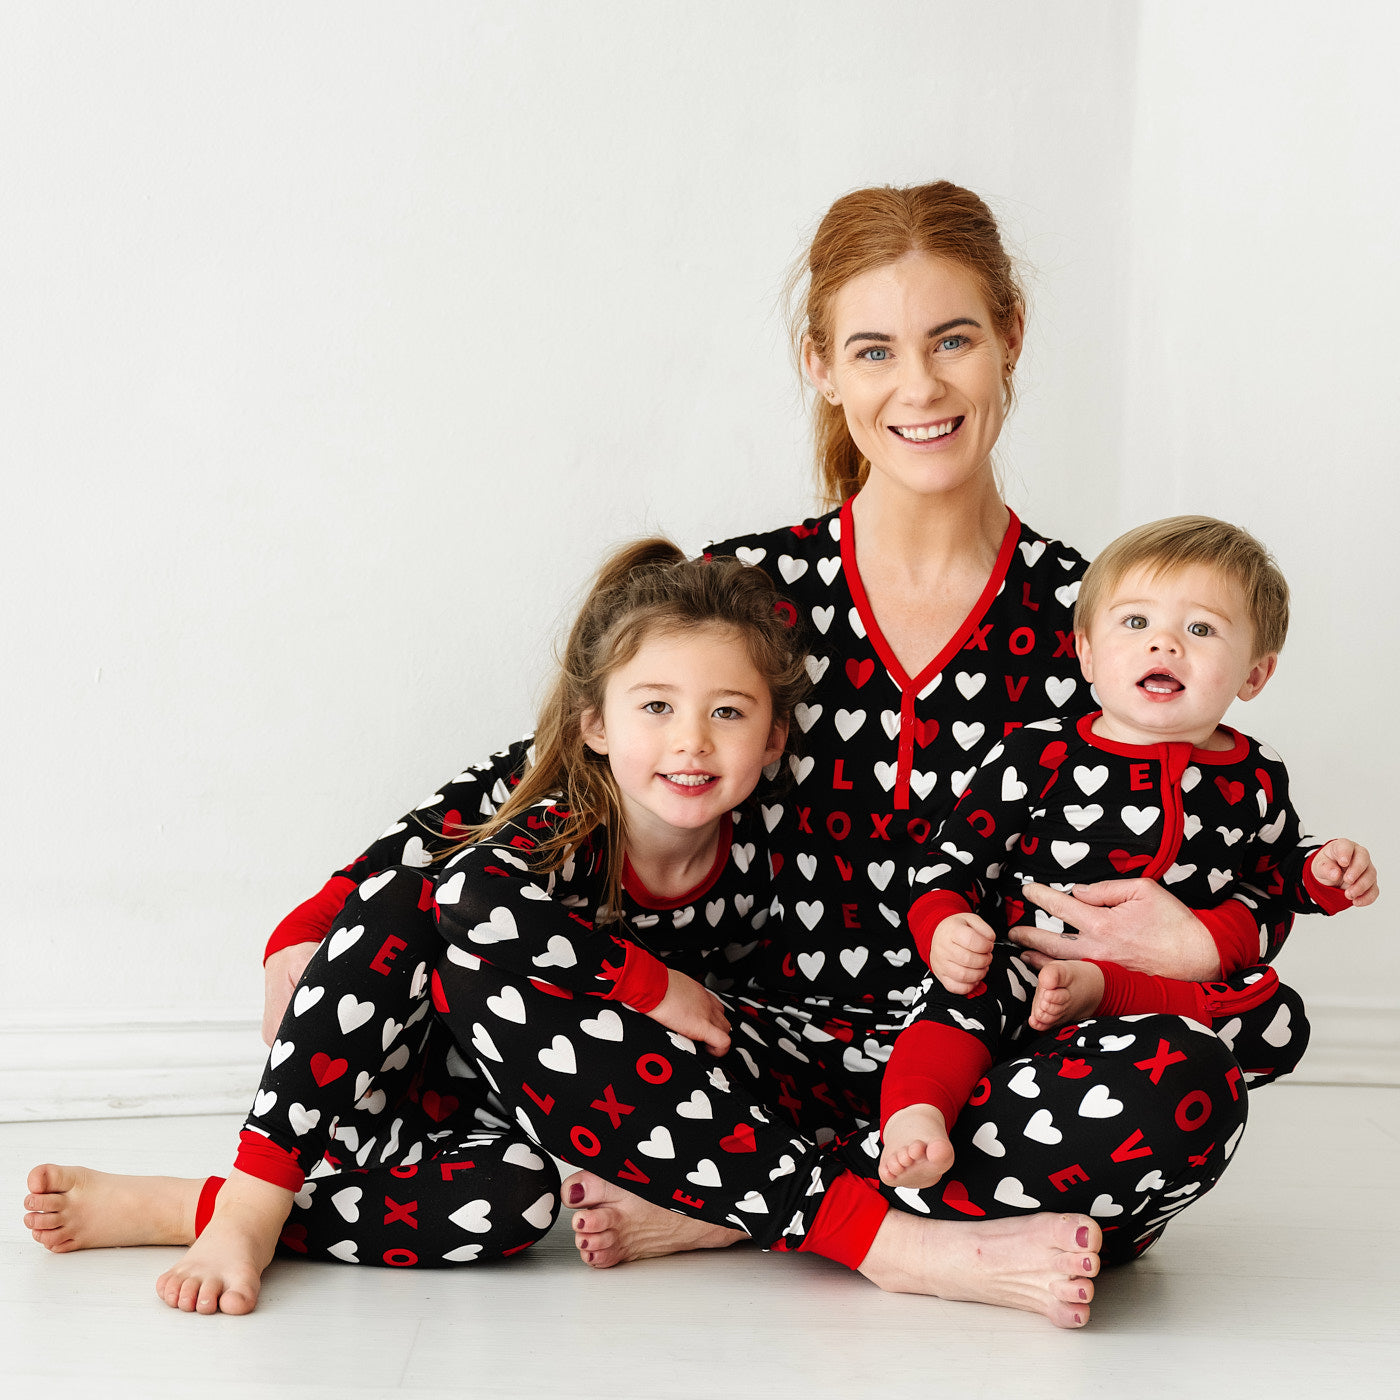 Mother and her two children sitting together wearing matching Black XOXO pajama sets. Mom is wearing a women's Black XOXO pajama top and matching women's pajama pants. Children are wearing Black XOXO pajamas in zippy and two piece styles